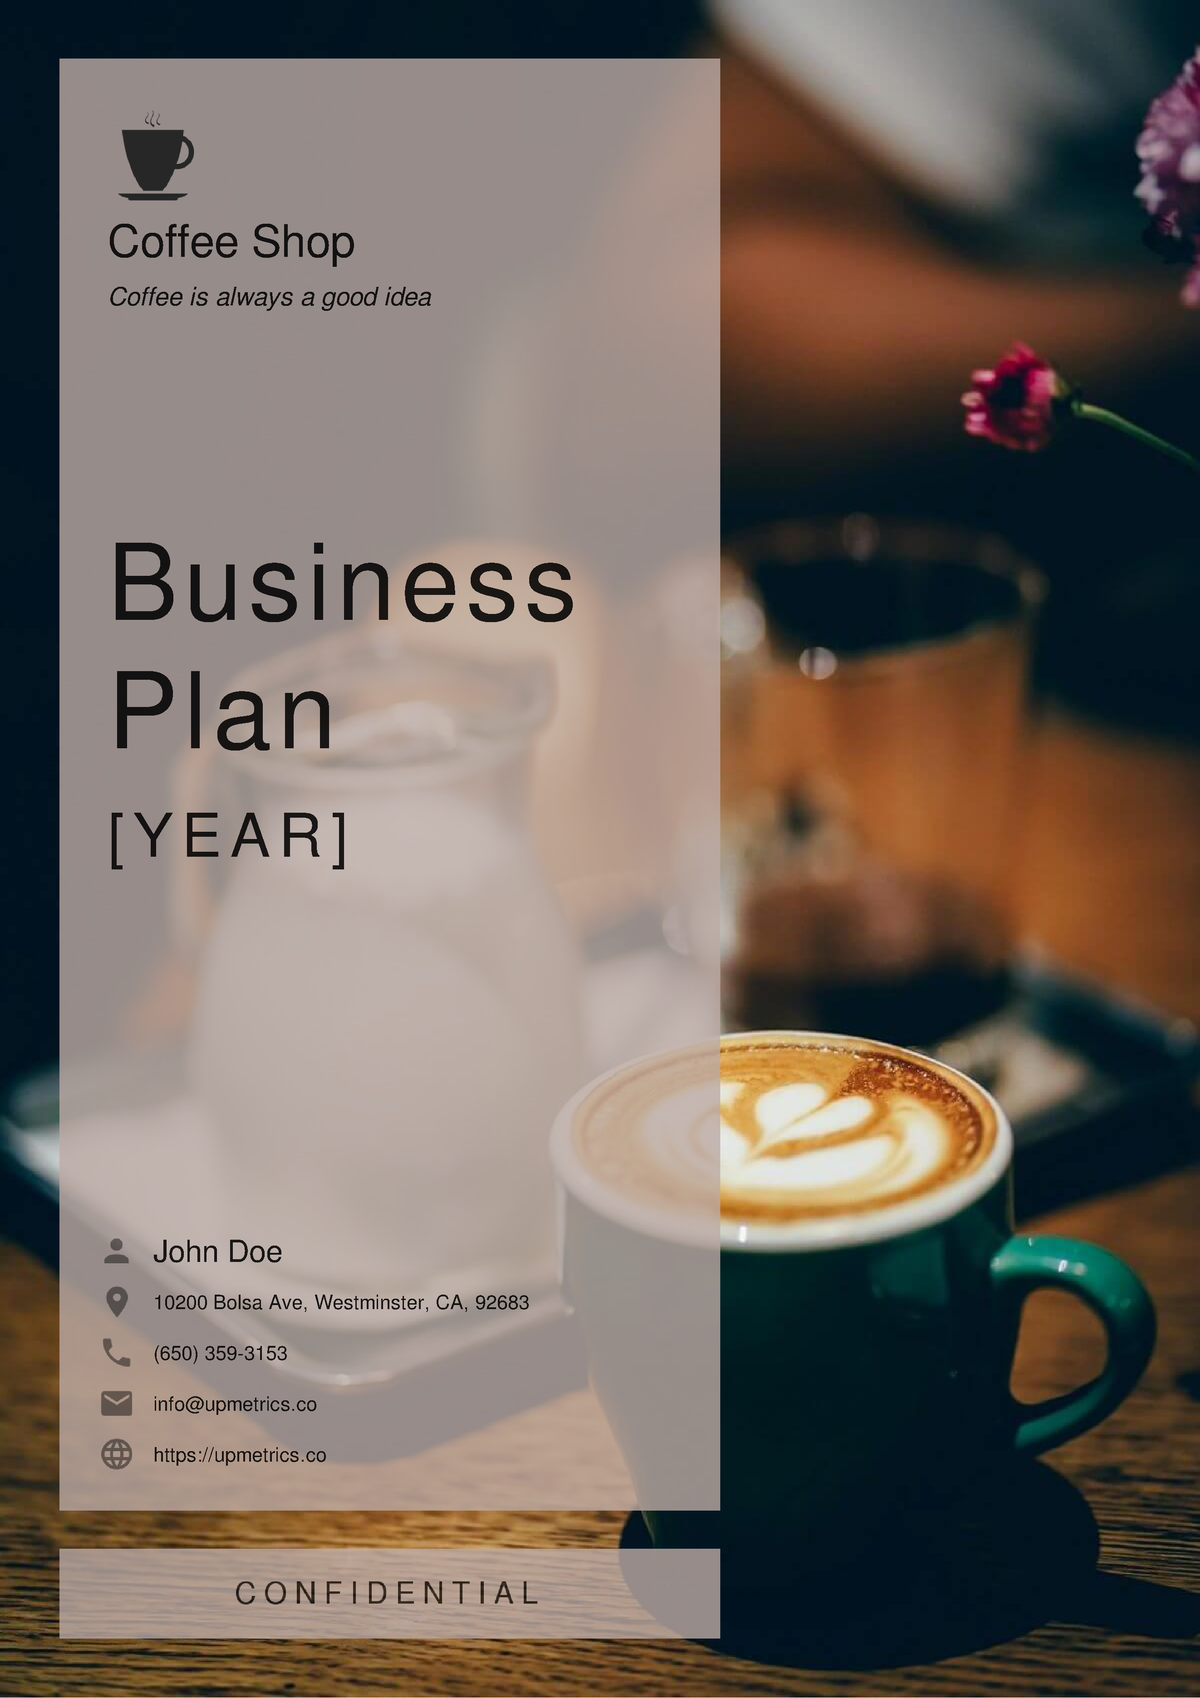 business plan on coffee production